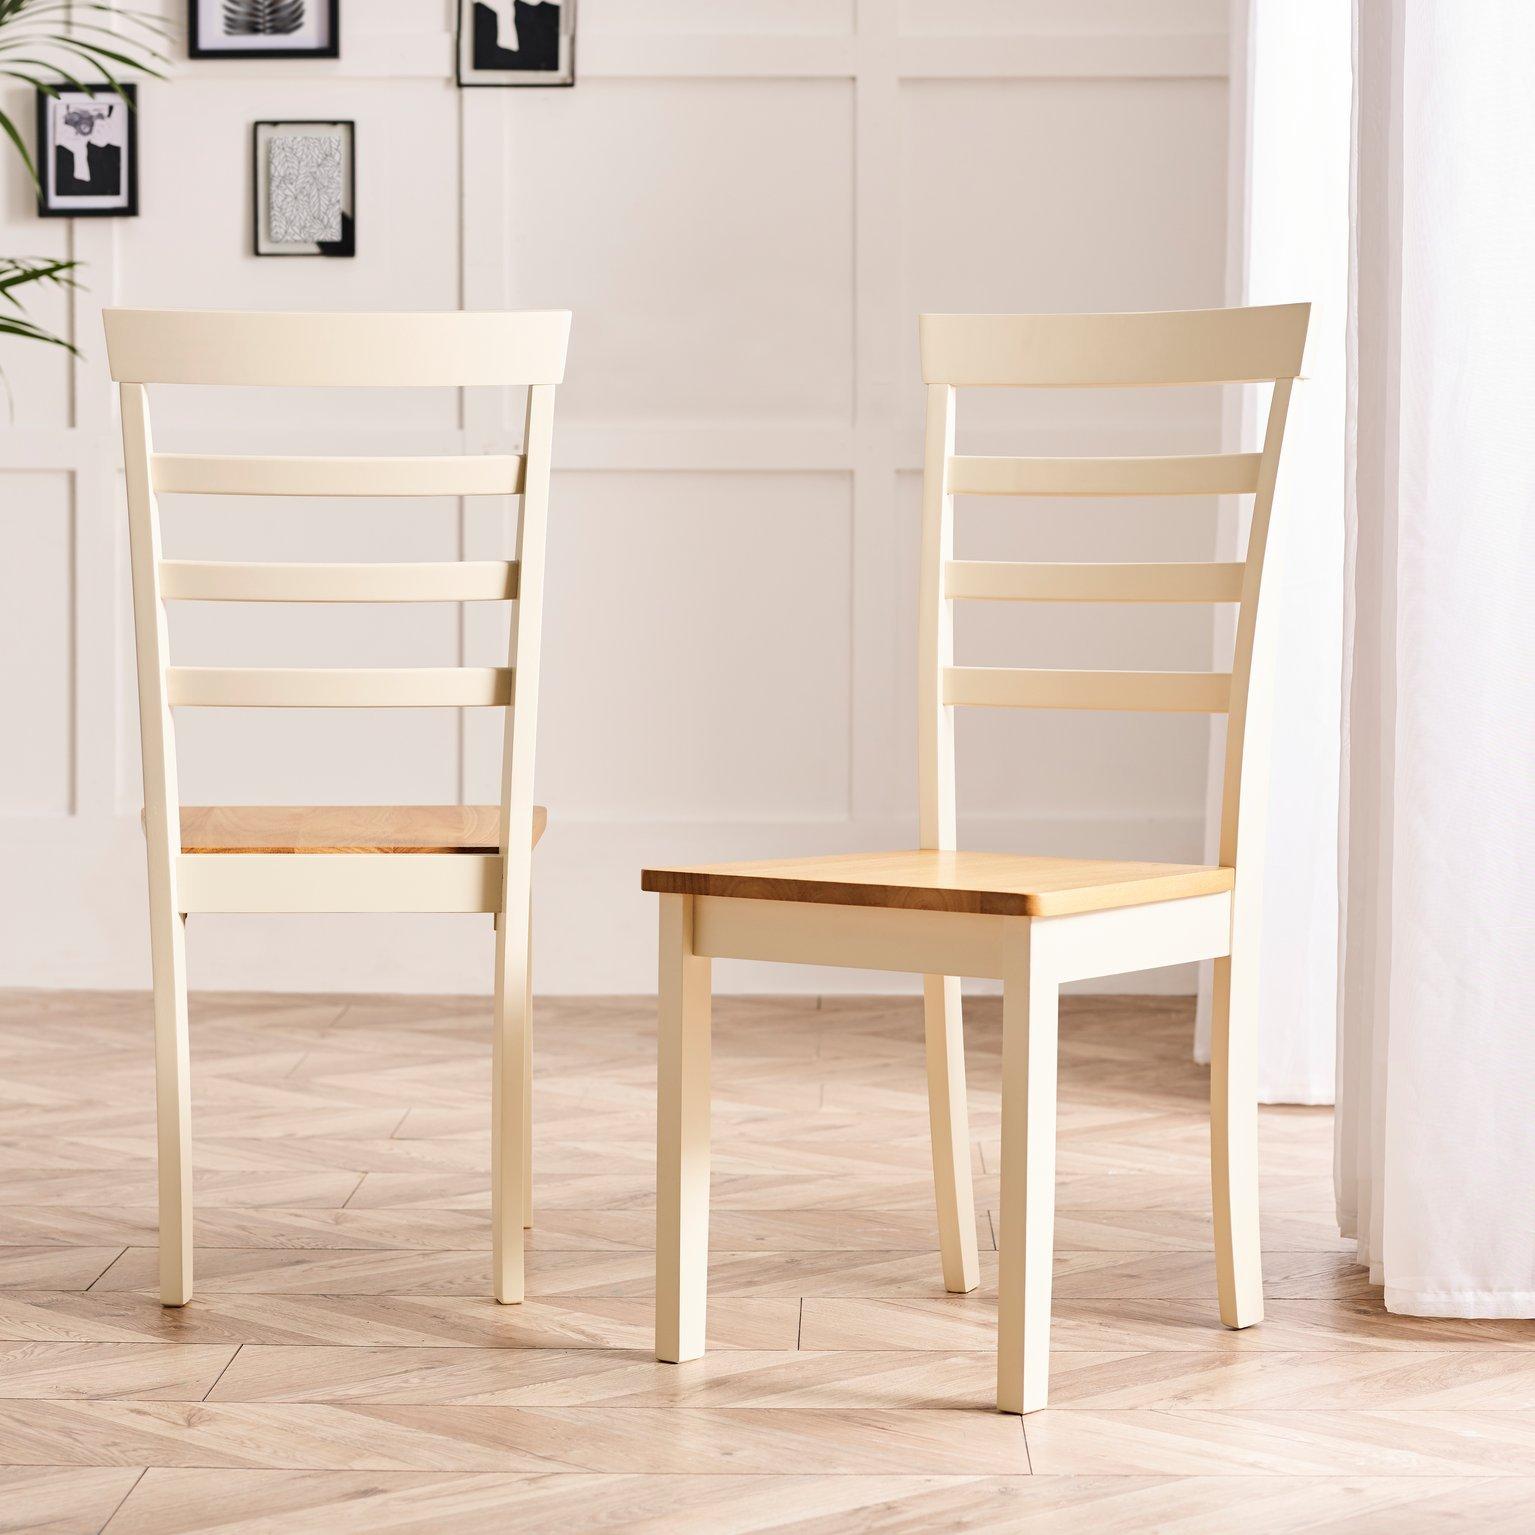 Set of 2 Whitby Solid Wood Dining Chairs With Oak Colour Seat